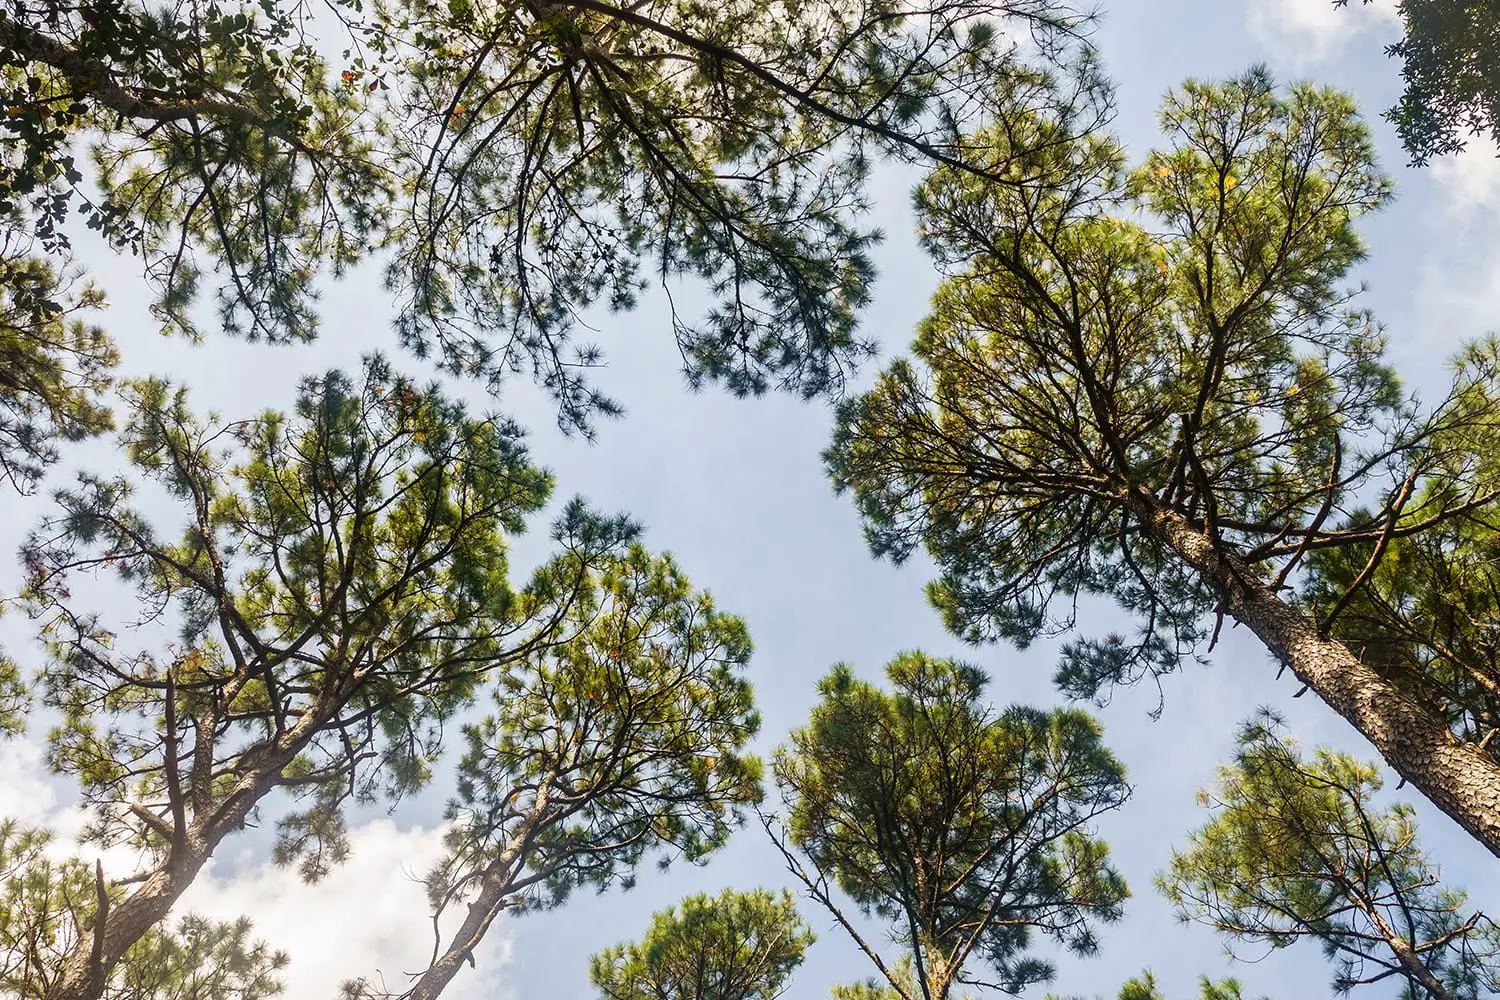 Canopy of tall longleaf pine trees (binomial name: Pinus palustris) at the Jacksonville Arboretum and Gardens in Florida, USA